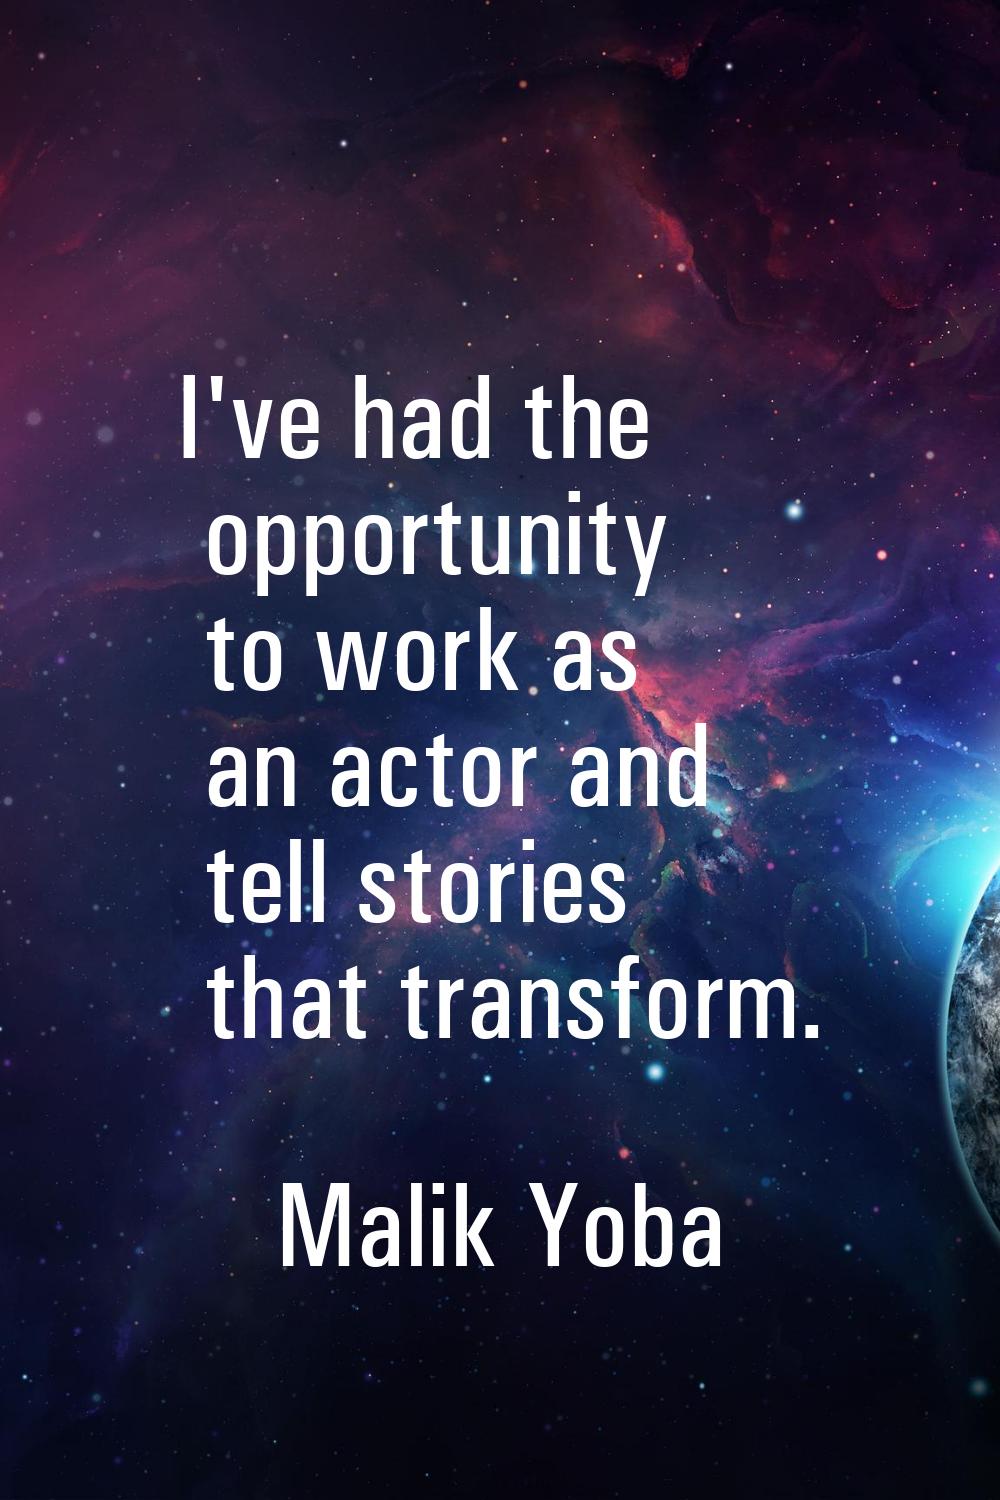 I've had the opportunity to work as an actor and tell stories that transform.